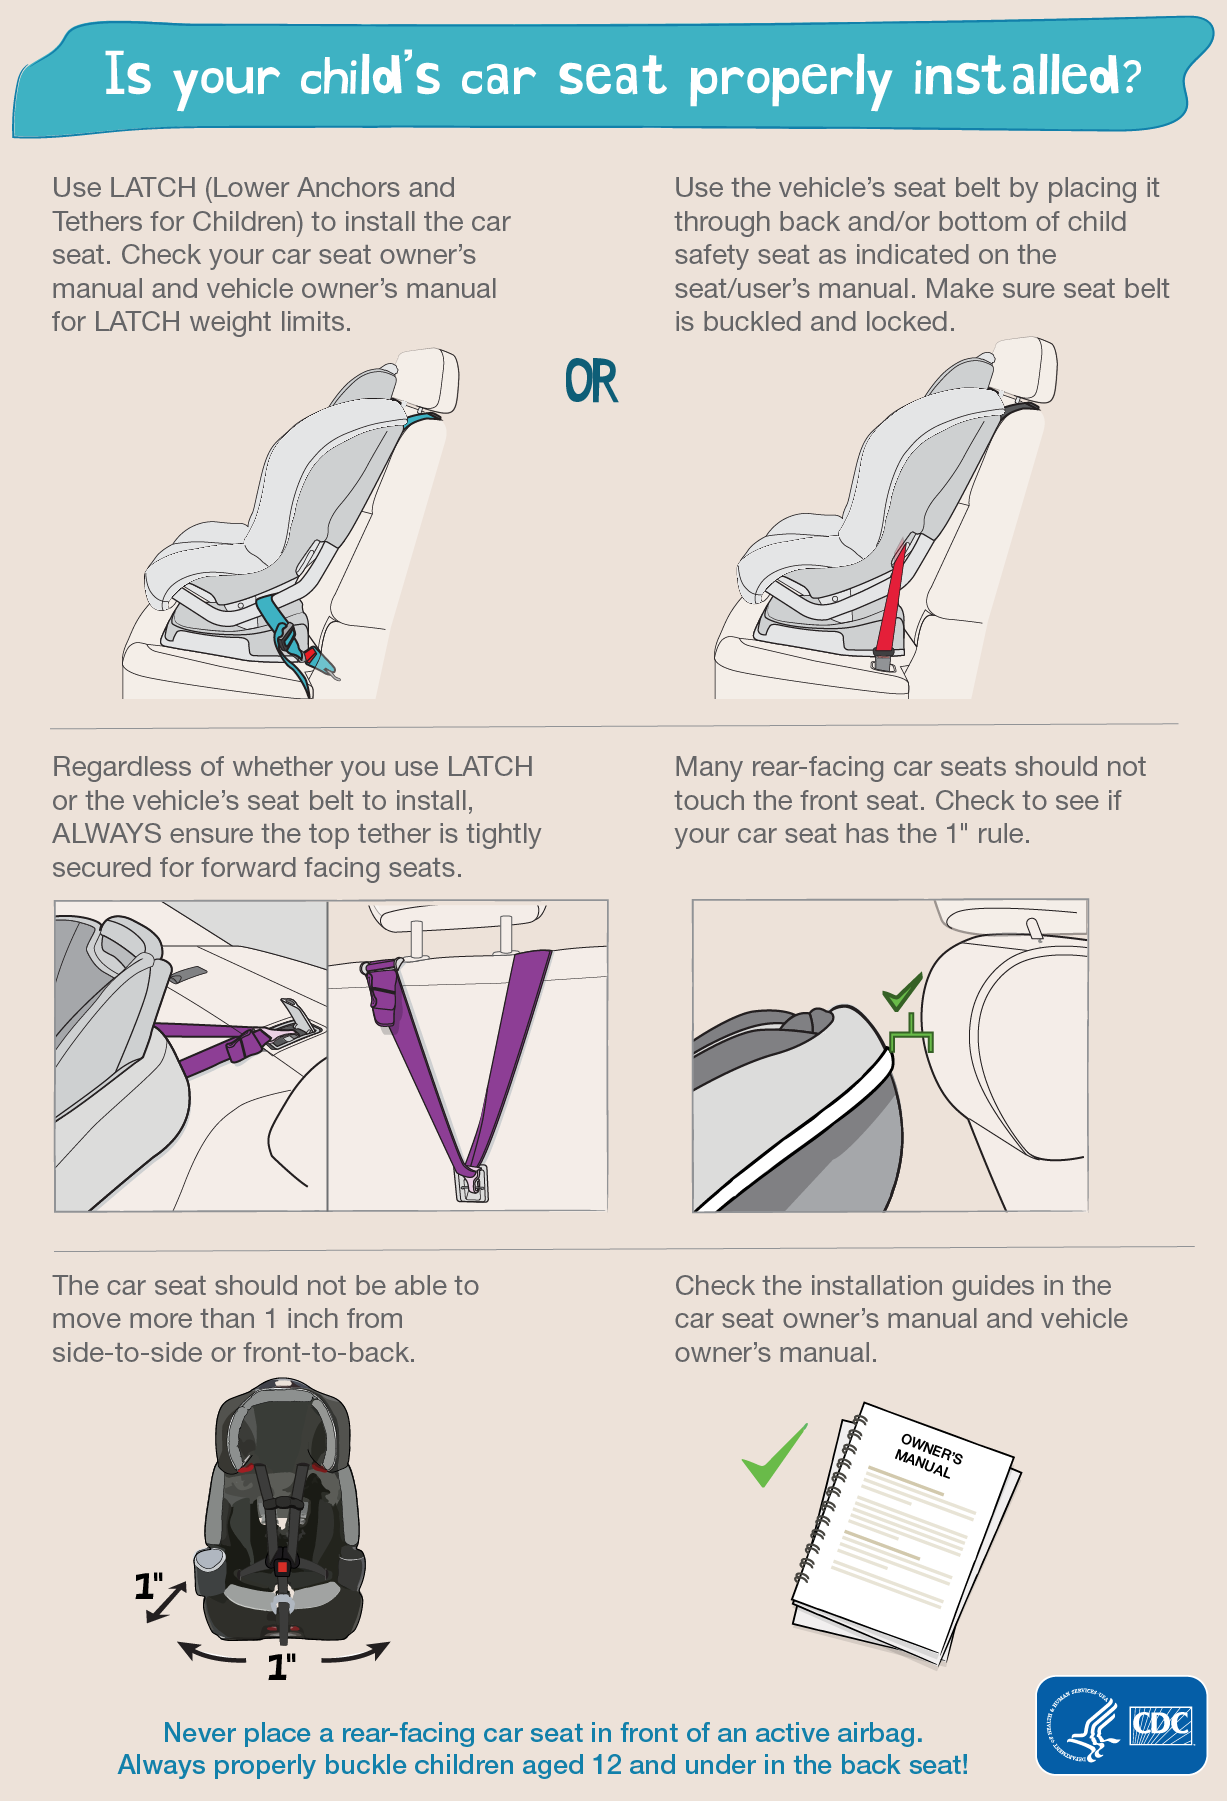 https://www.cdc.gov/transportationsafety/images/child_passenger_safety/17_280545__carseat-safety-final_14.png